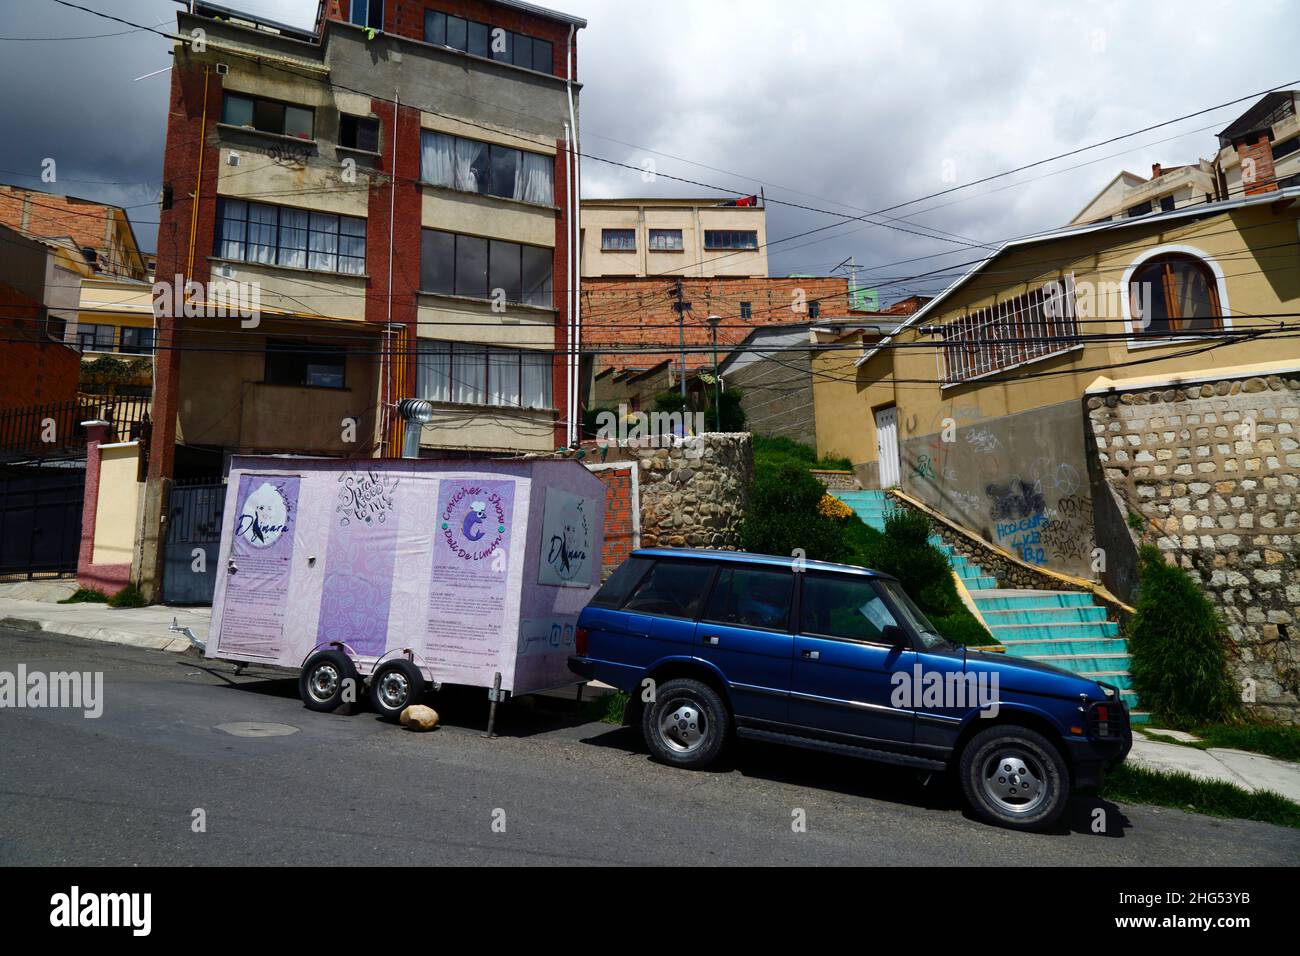 First generation 4 door Range Rover Classic and food trailer for selling burgers, ceviche and other Peruvian seafood dishes, Sopocachi district, La Paz, Bolivia. Stock Photo